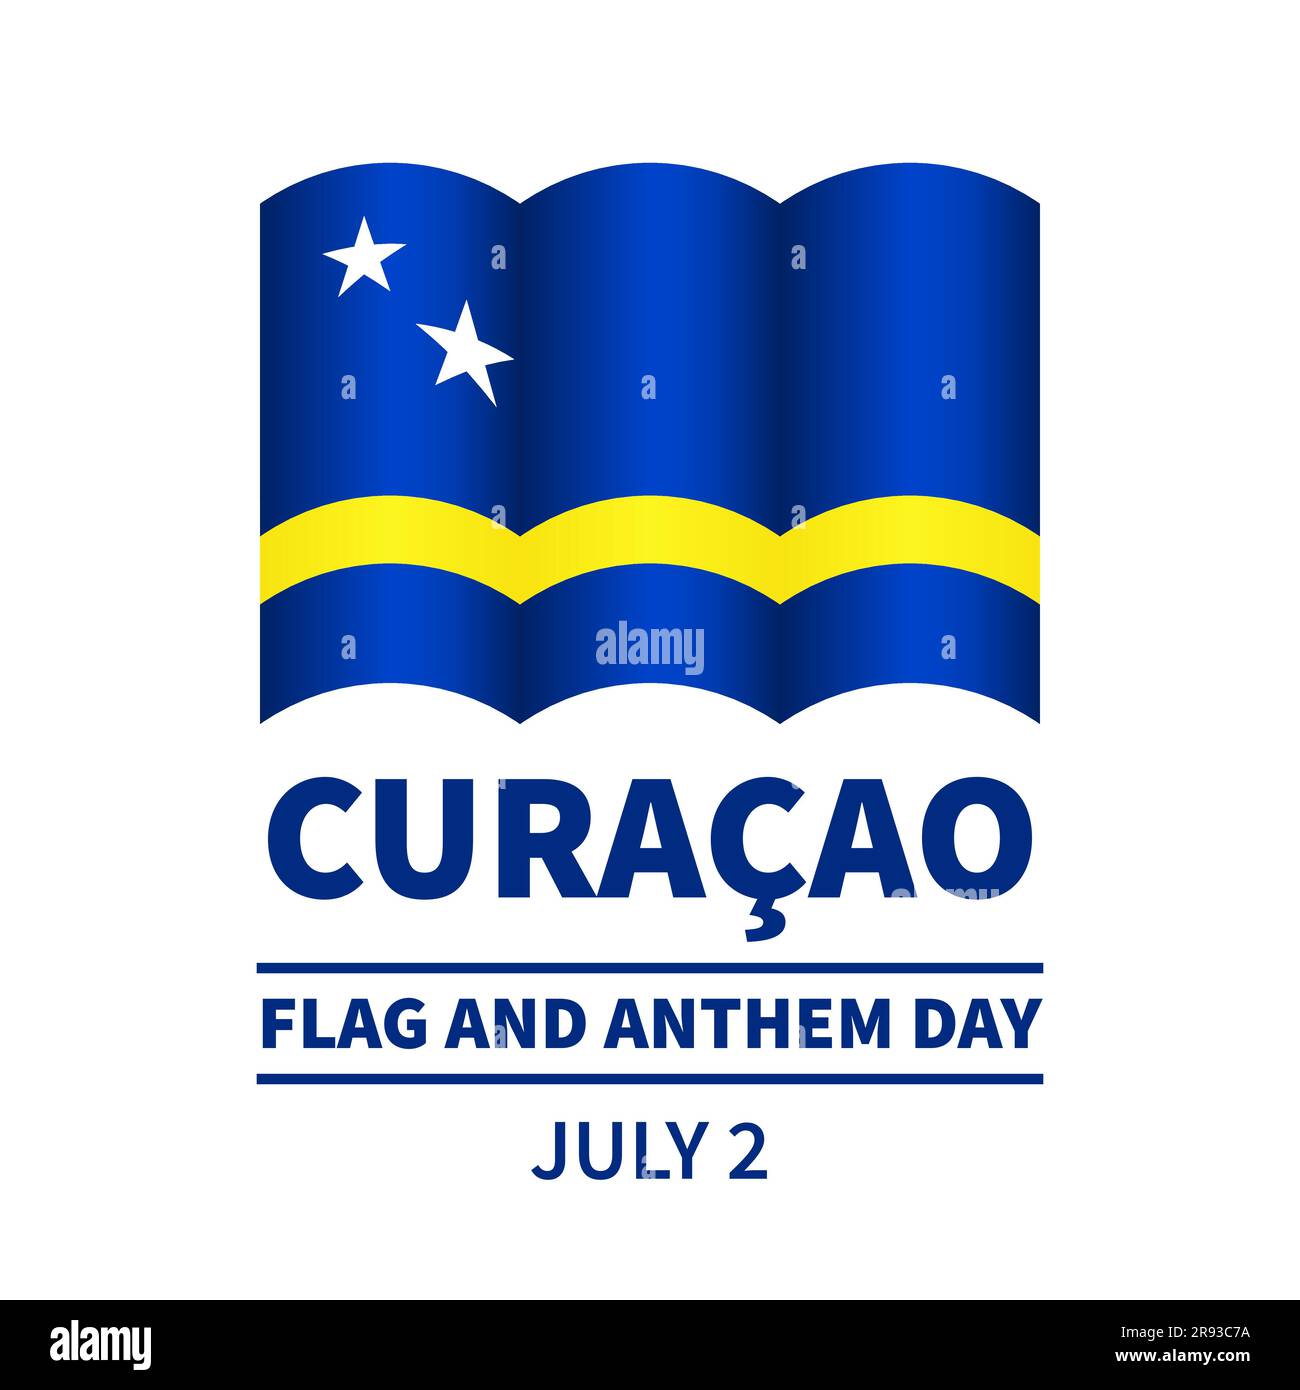 Curacao Flag and Anthem Day. National holiday celebrated on July 2. Vector template for typography poster, banner, greeting card, flyer, etc. Stock Vector